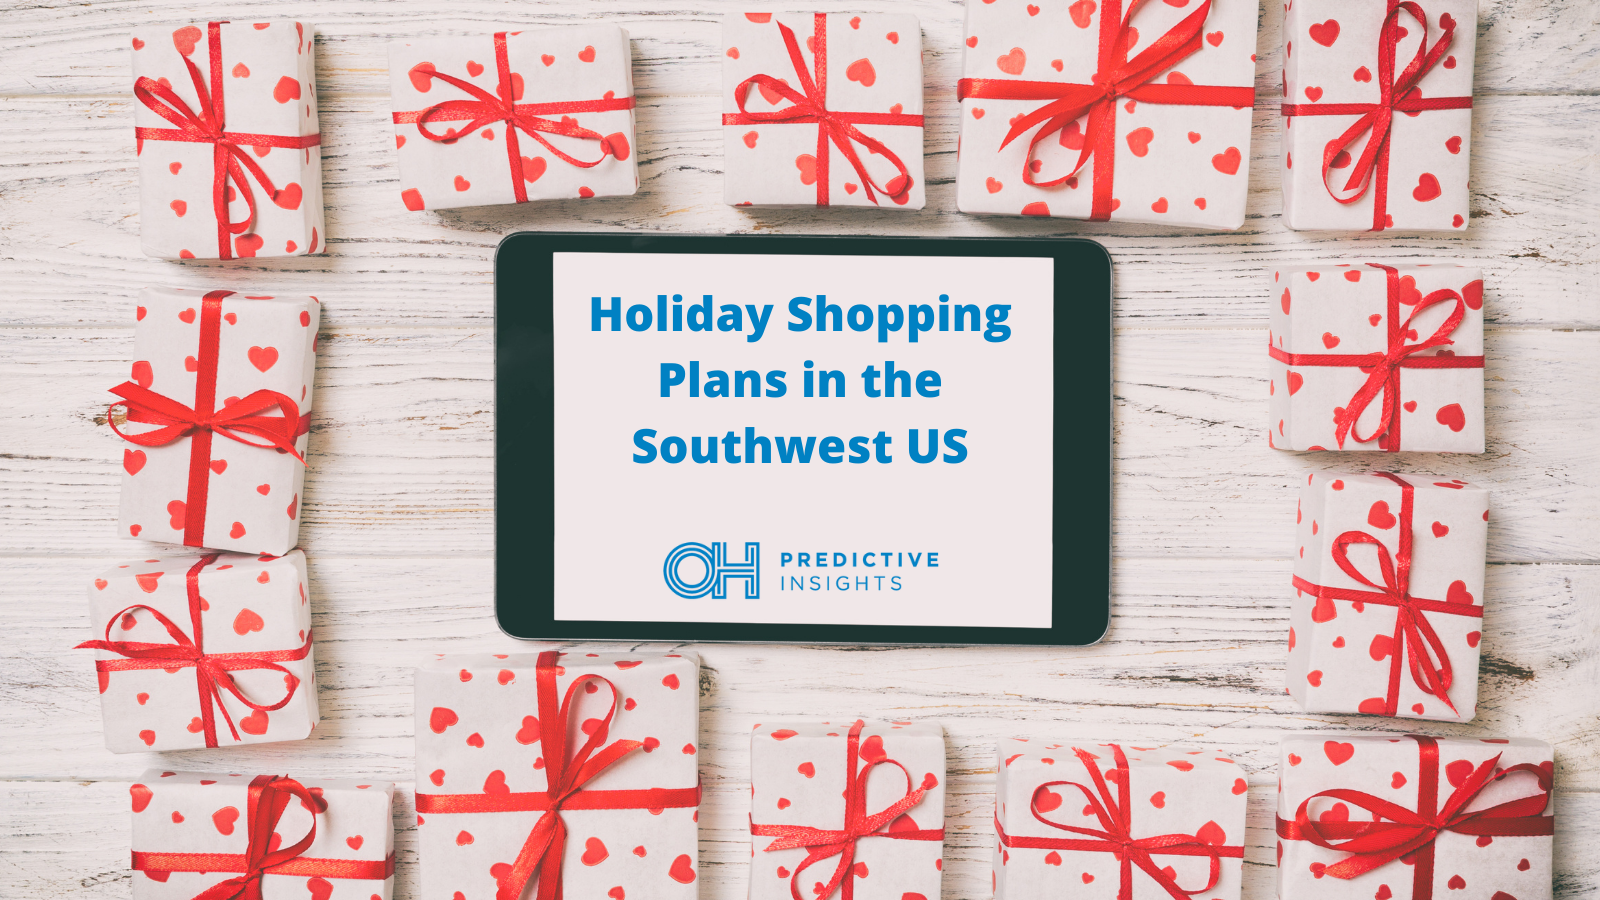 Here’s What Holiday Shopping Plans Look Like in the Southwest US